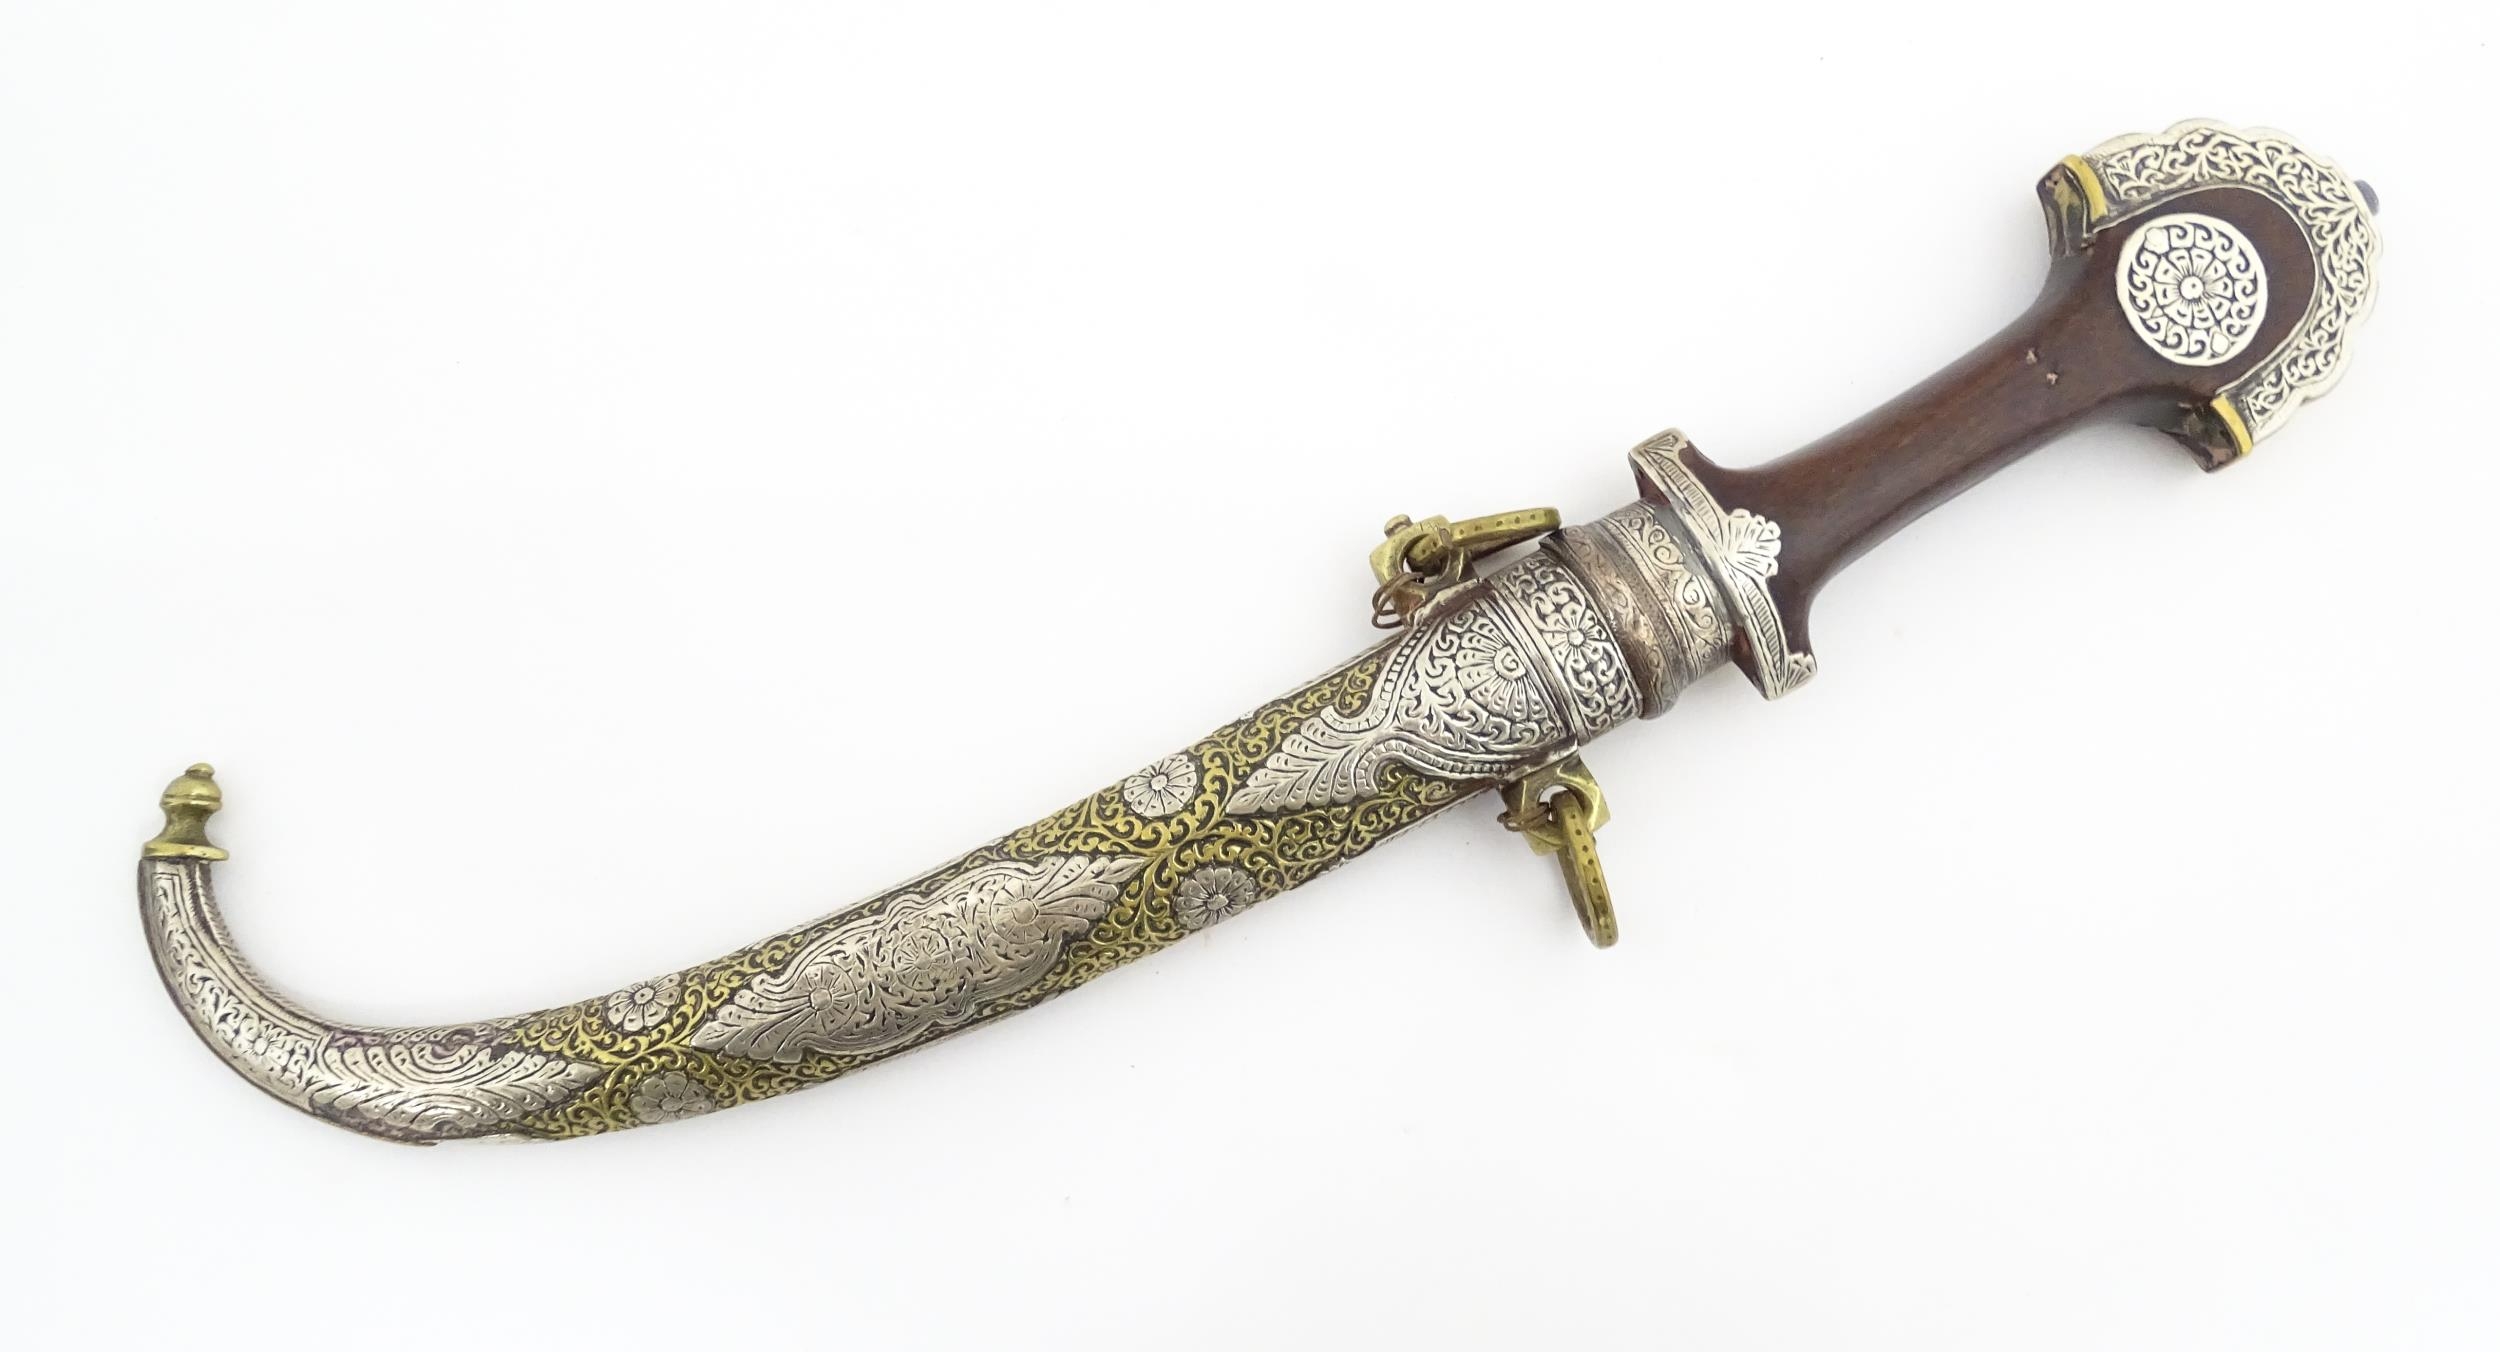 Ethnographic / Native / Tribal: A Moroccan Koummya / Jambiya dagger with carved wooden handle with